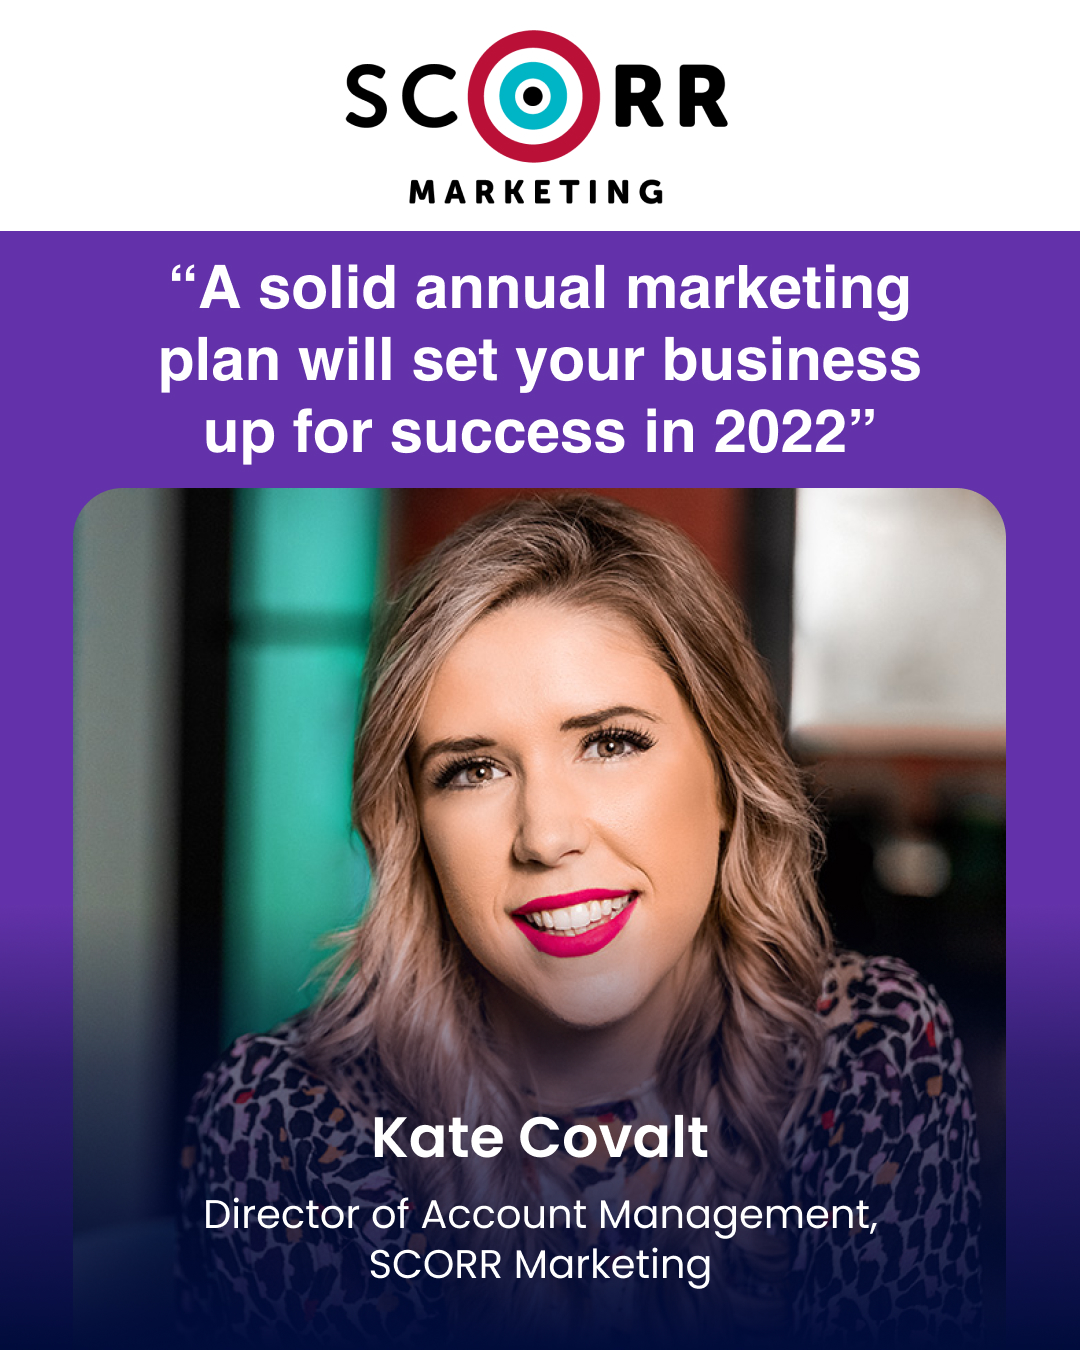 “A solid annual marketing plan will set your business up for success in 2022”